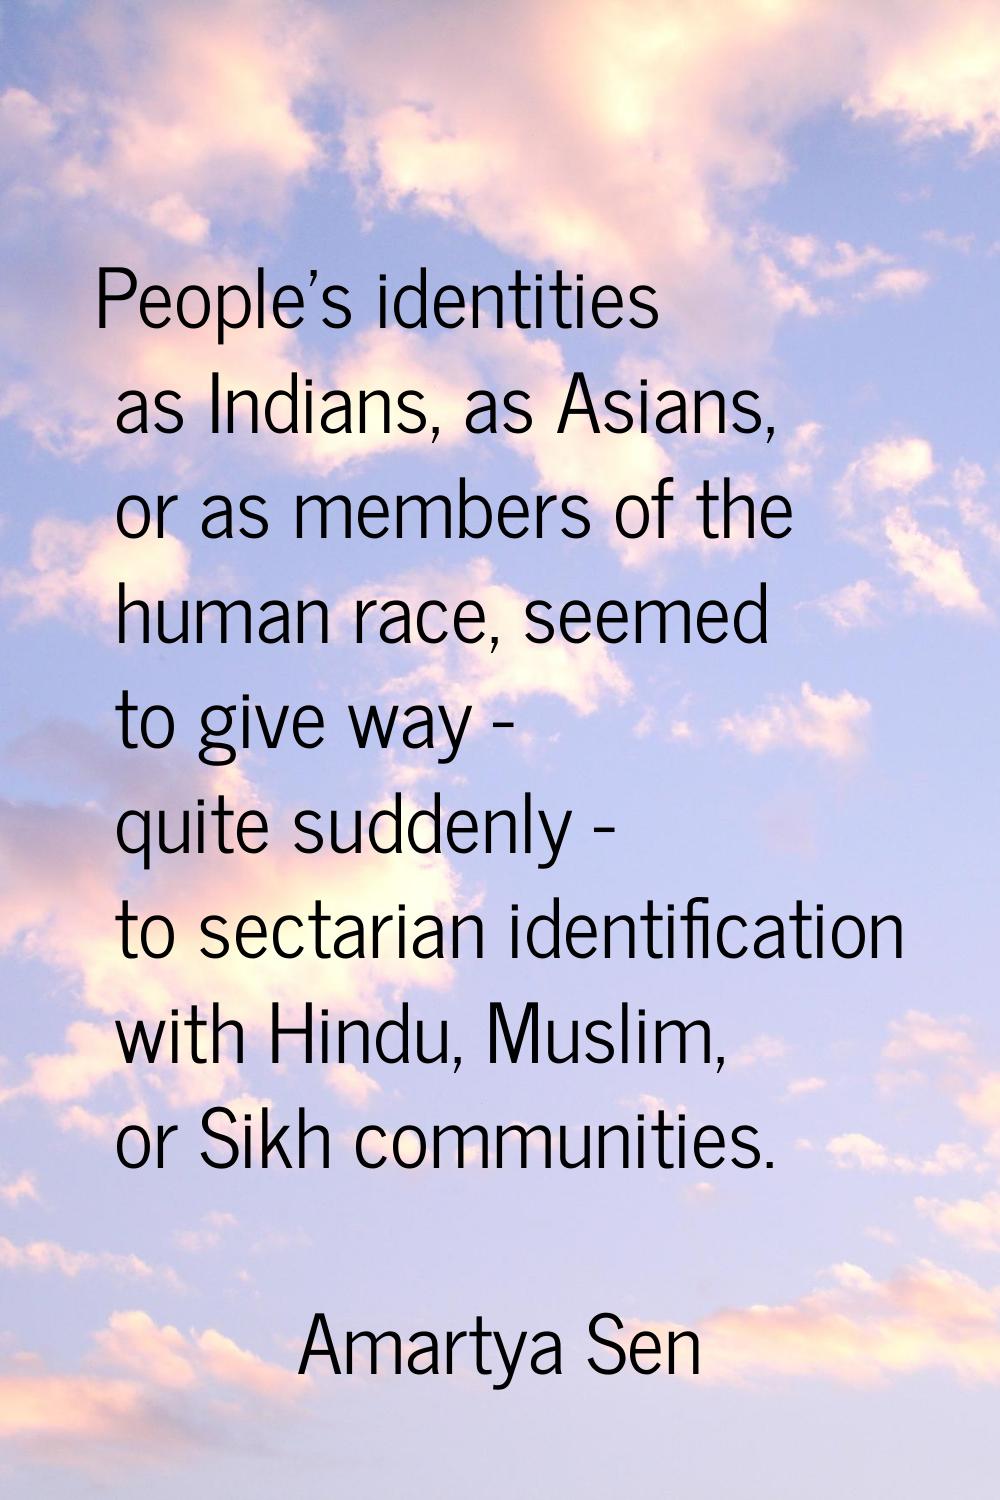 People's identities as Indians, as Asians, or as members of the human race, seemed to give way - qu